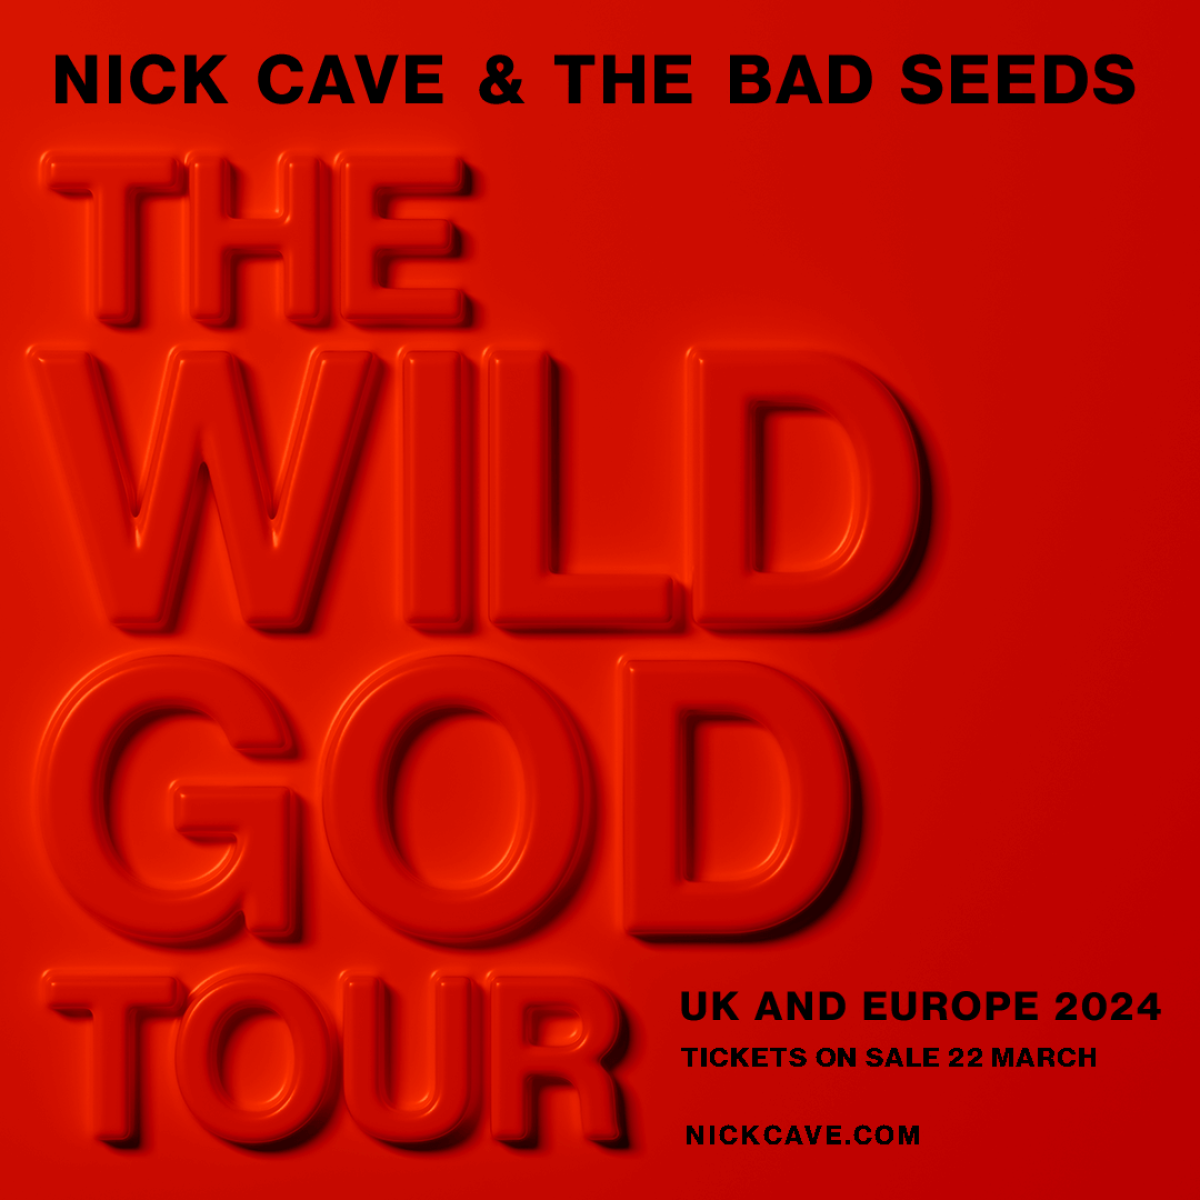 Nick Cave and the Bad Seeds - The Wild God Tour al Olympiahalle Monaco Tickets